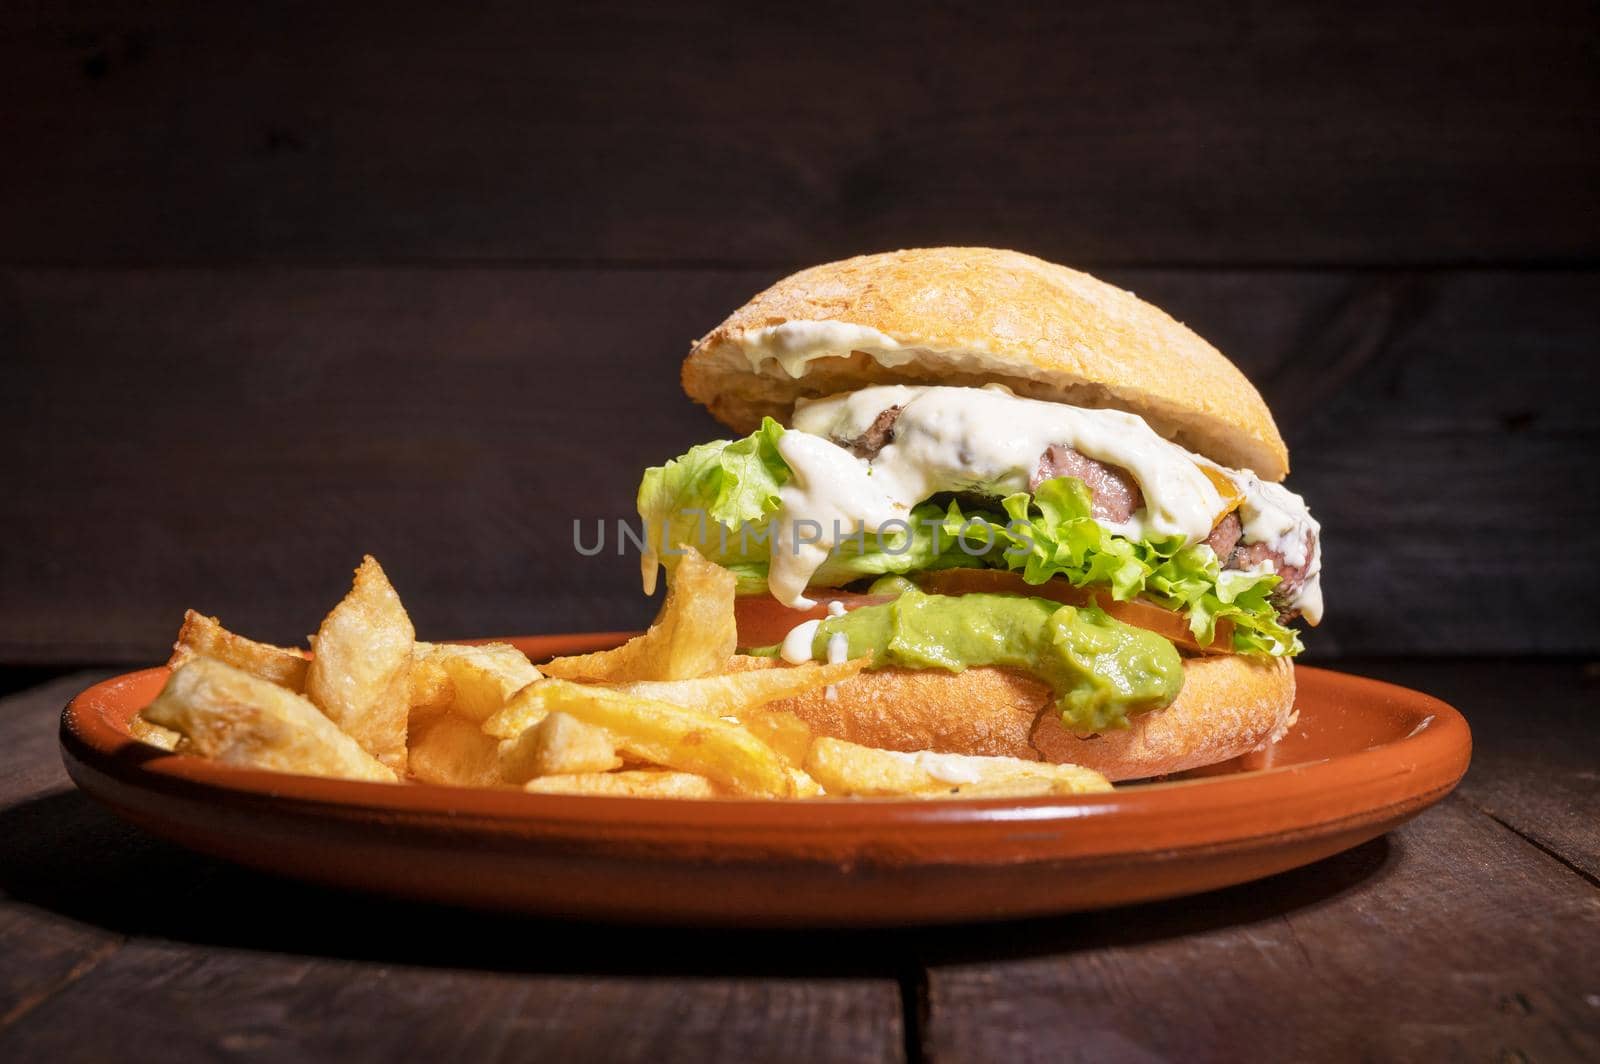 Delicious gourmet beef burger with creamy sauce, lettuce, tomato and guacamole, served with french fries on a rustic plate on a wooden table. by HERRAEZ